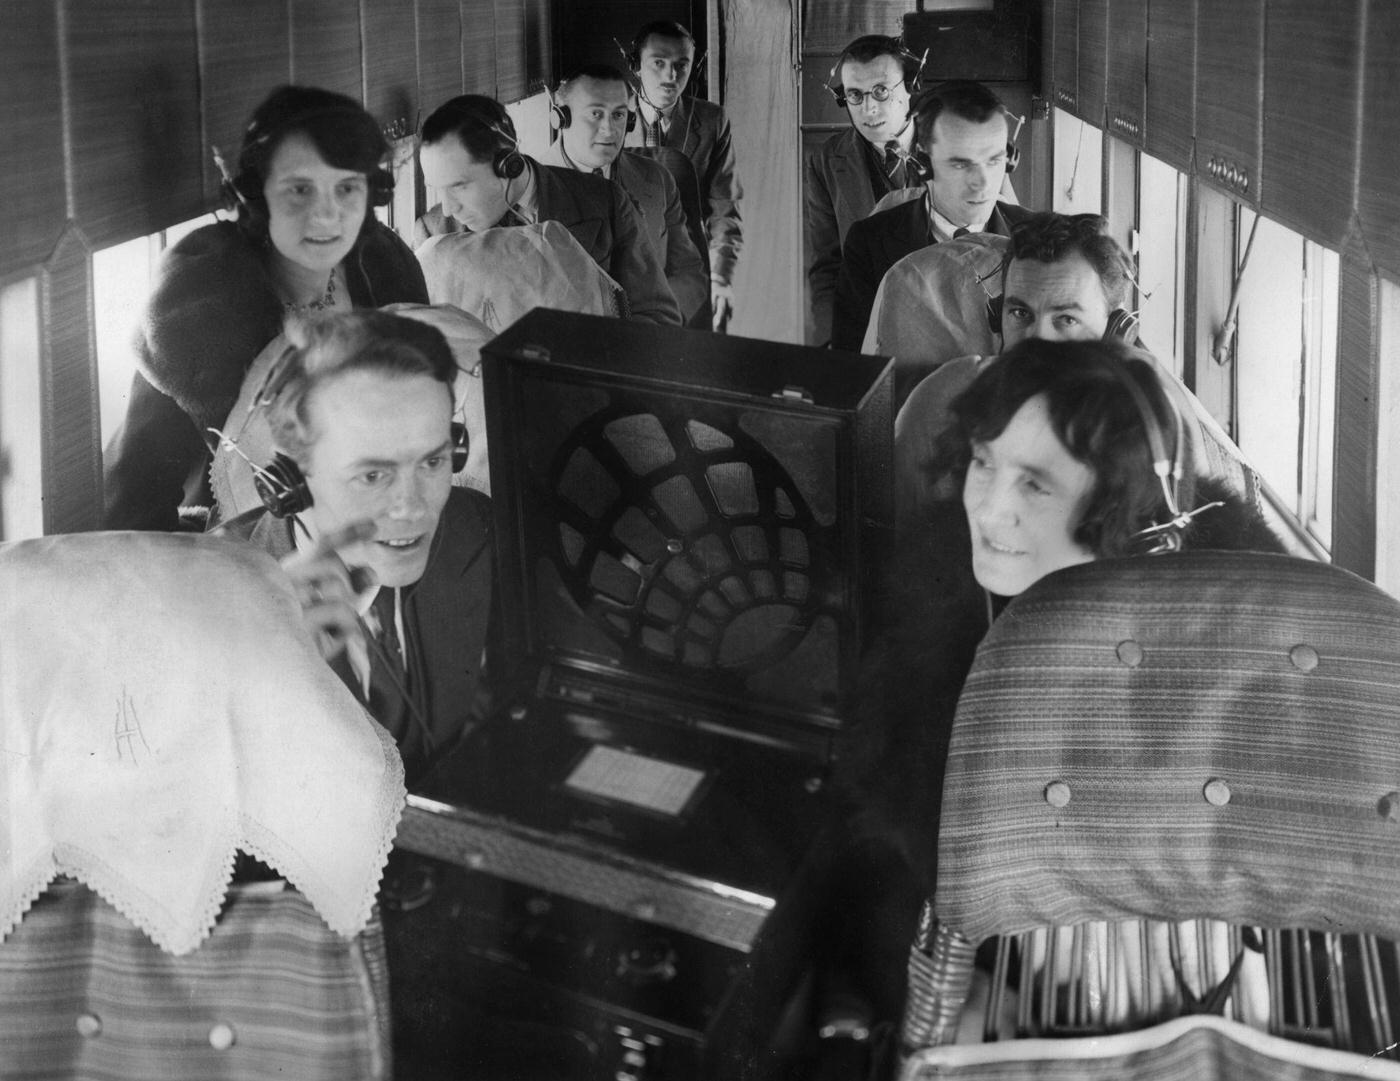 Passengers listening to a radio on board an airplane.